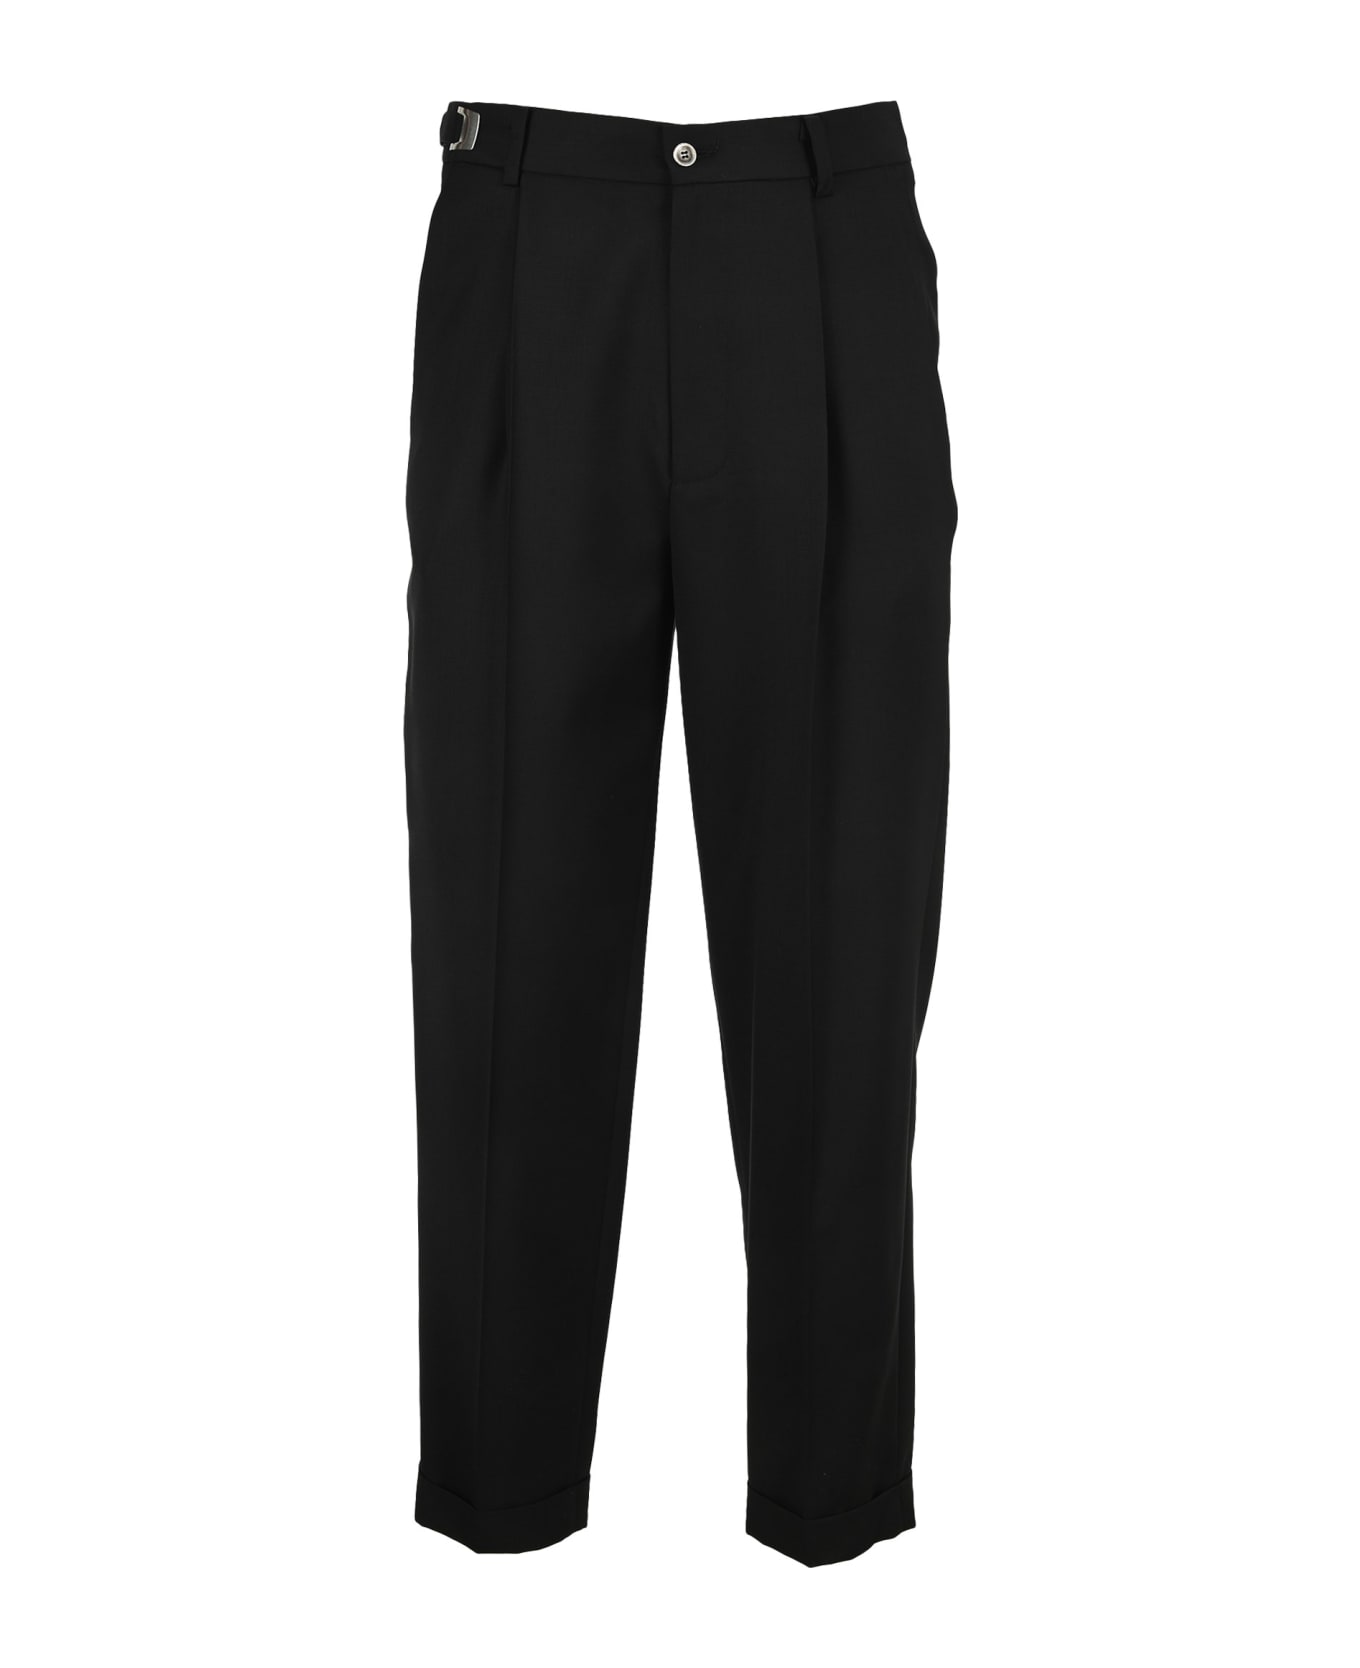 Magliano Black Classic Pience Tropical Trousers - BLACK ボトムス